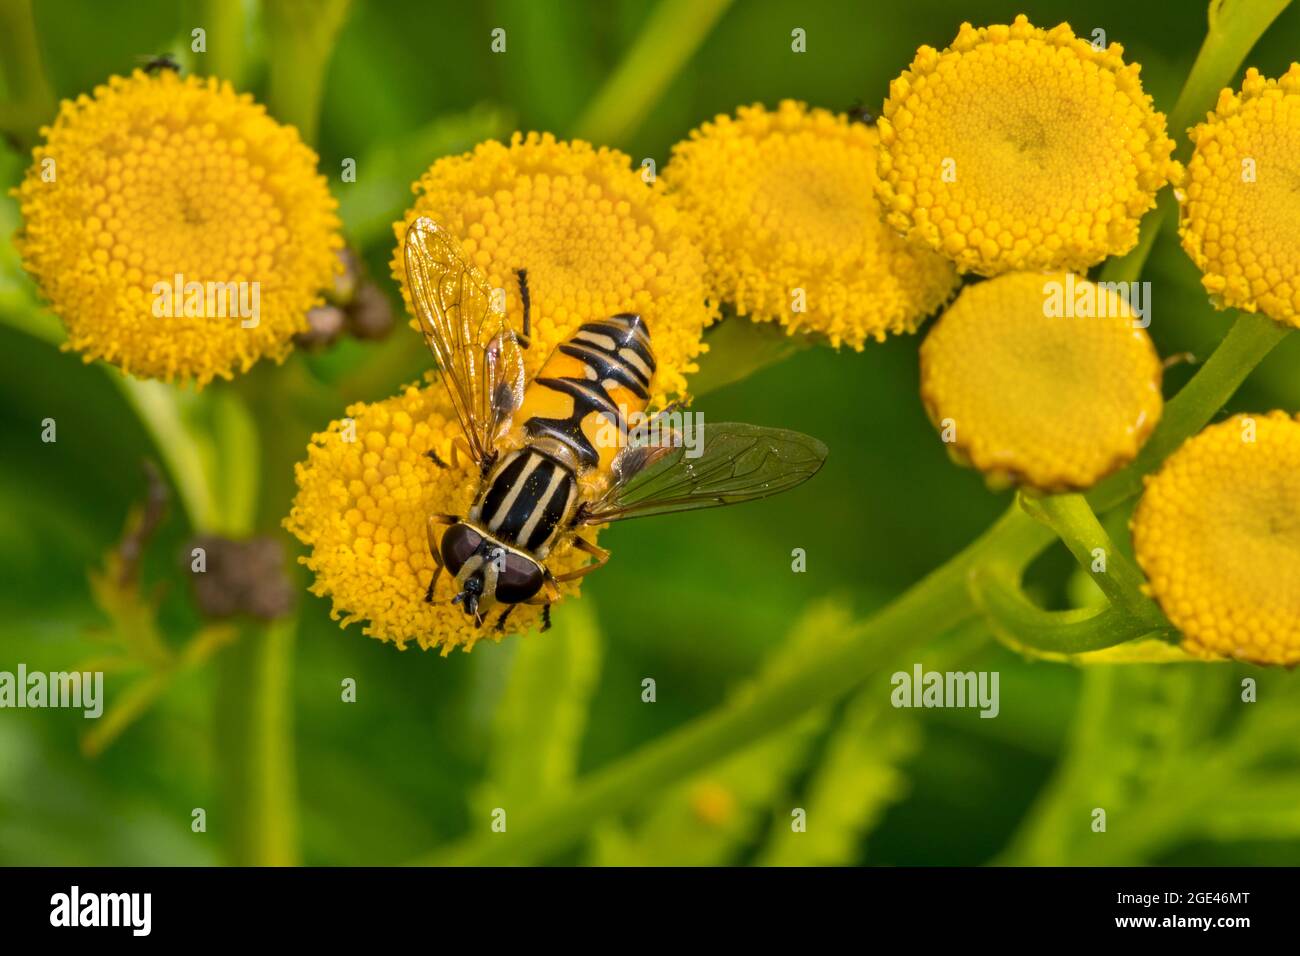 Sun fly / Marsh hoverfly / tiger hoverfly (Helophilus pendulus / Helophilus similis) female pollinating tansy (Tanacetum vulgare) in flower in summer Stock Photo